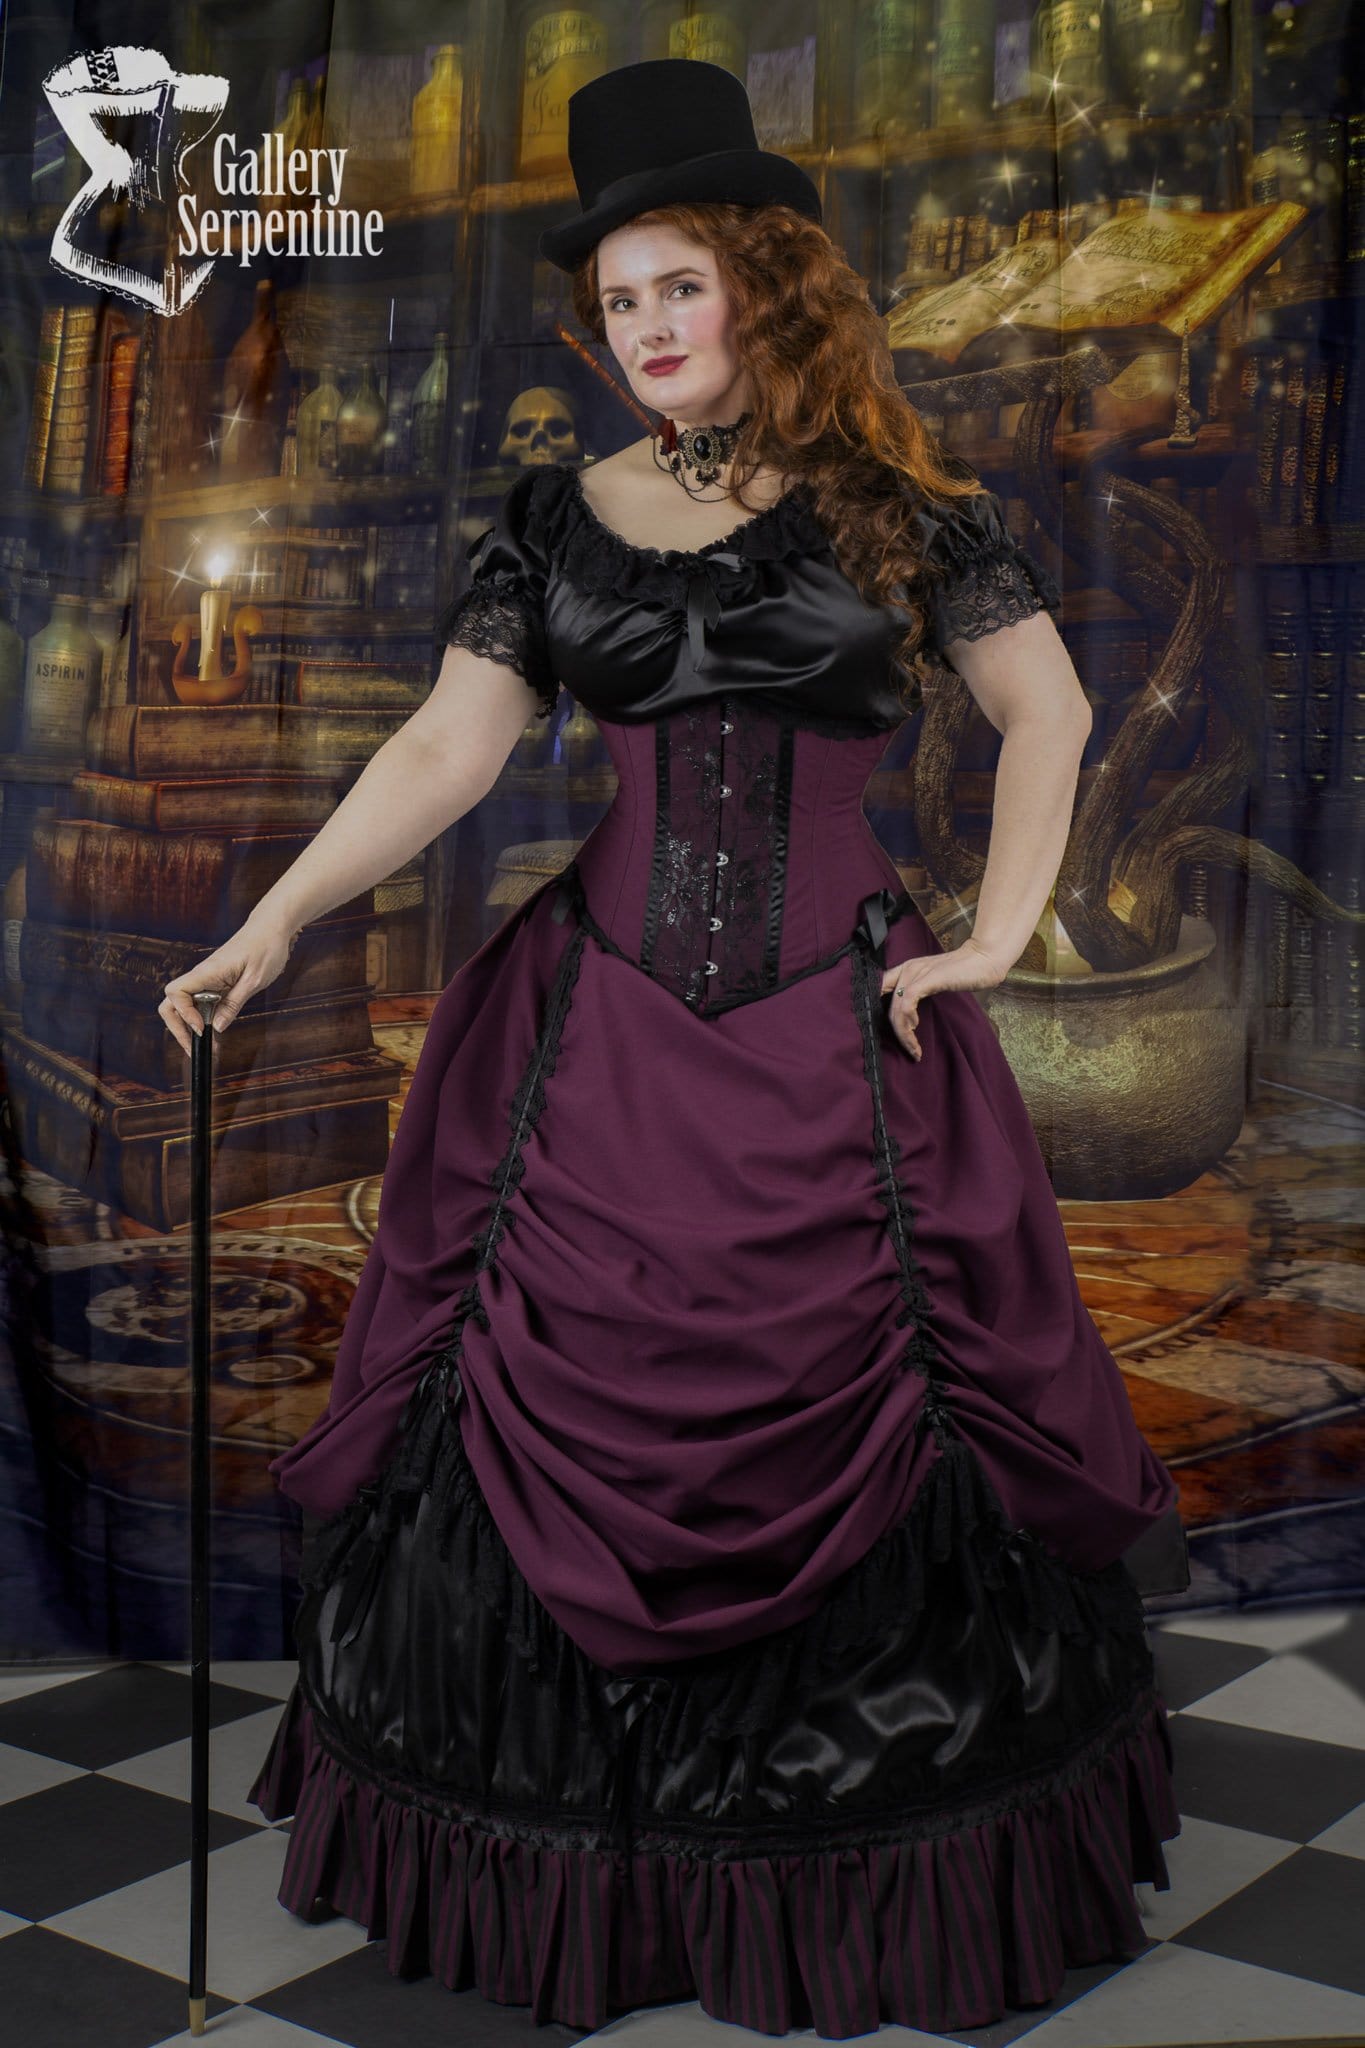 Burgundy Beauty Full Victorian Gown ensemble with top hat